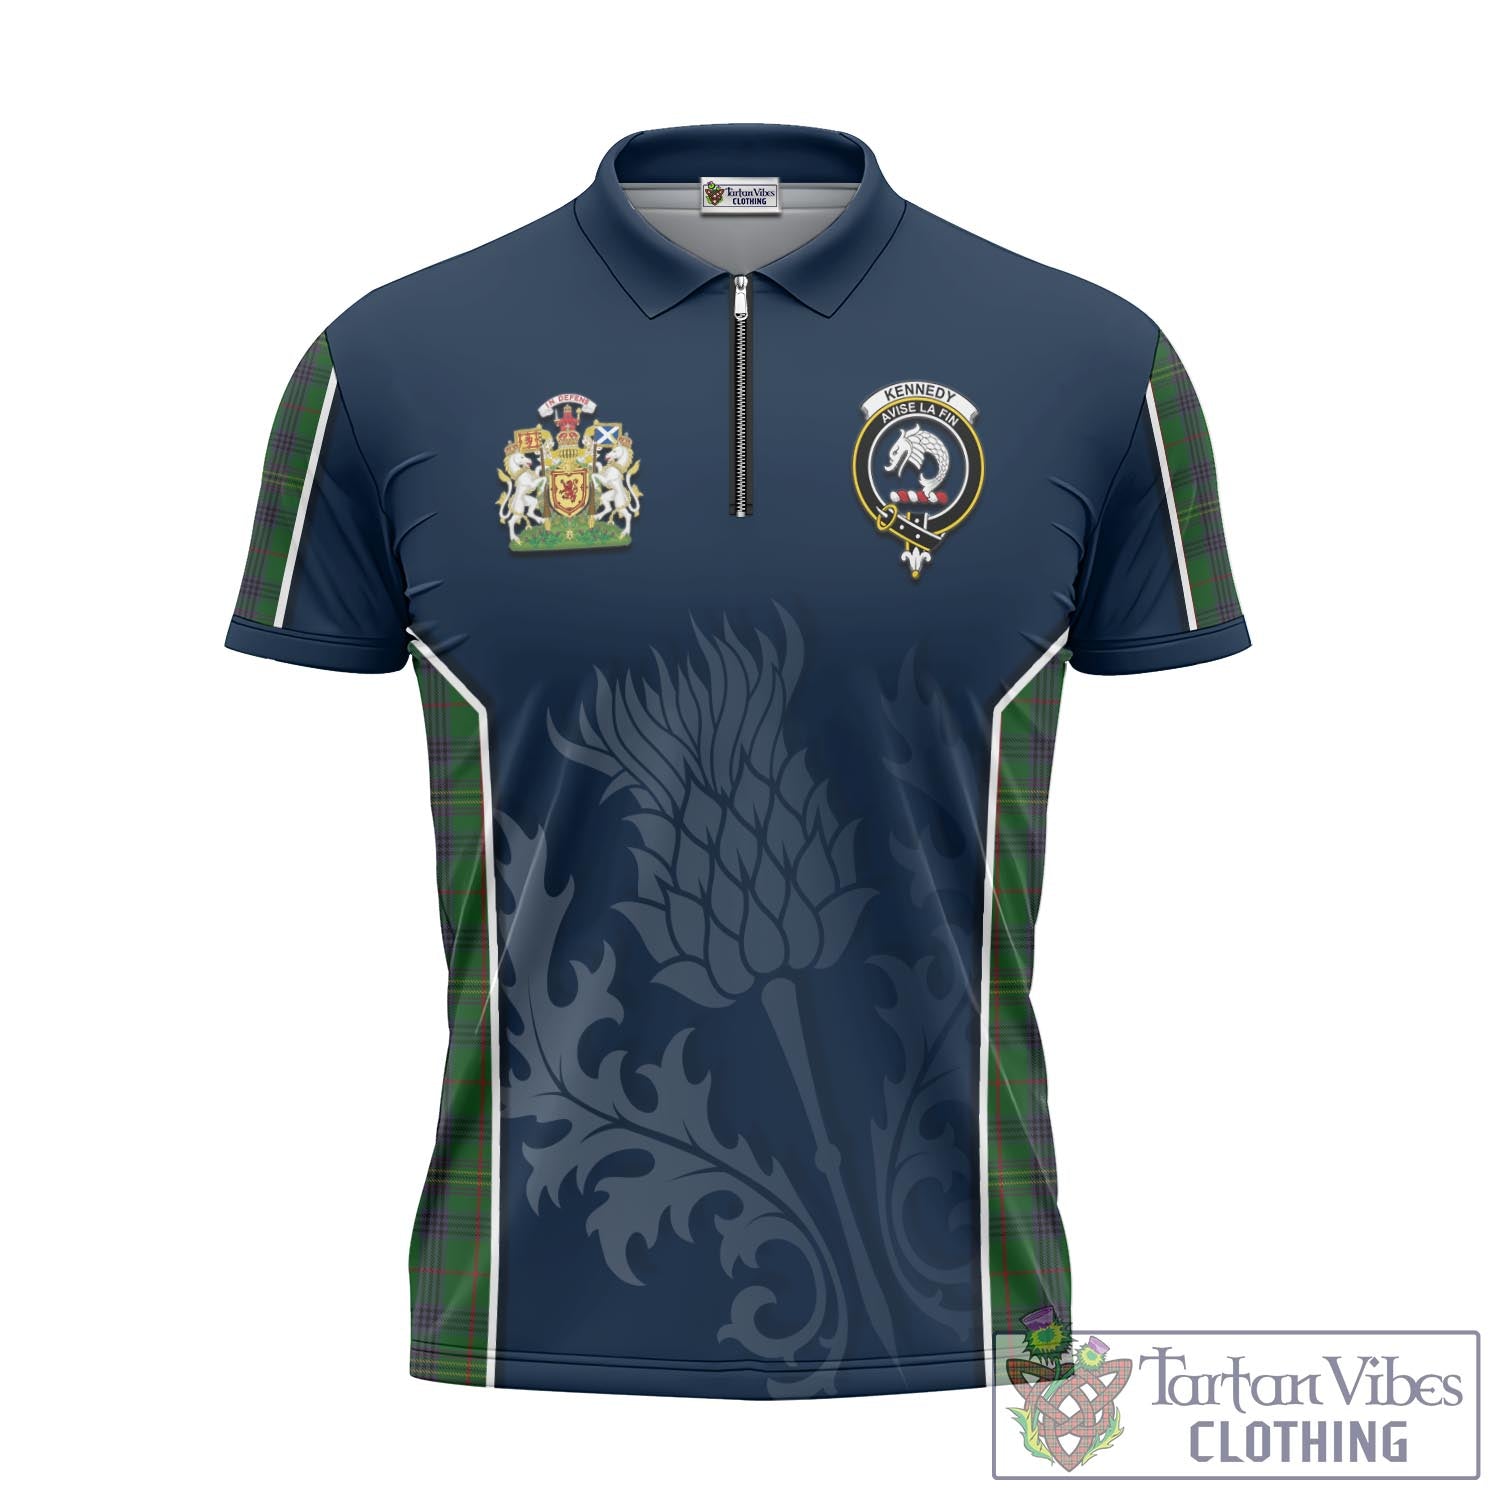 Tartan Vibes Clothing Kennedy Tartan Zipper Polo Shirt with Family Crest and Scottish Thistle Vibes Sport Style